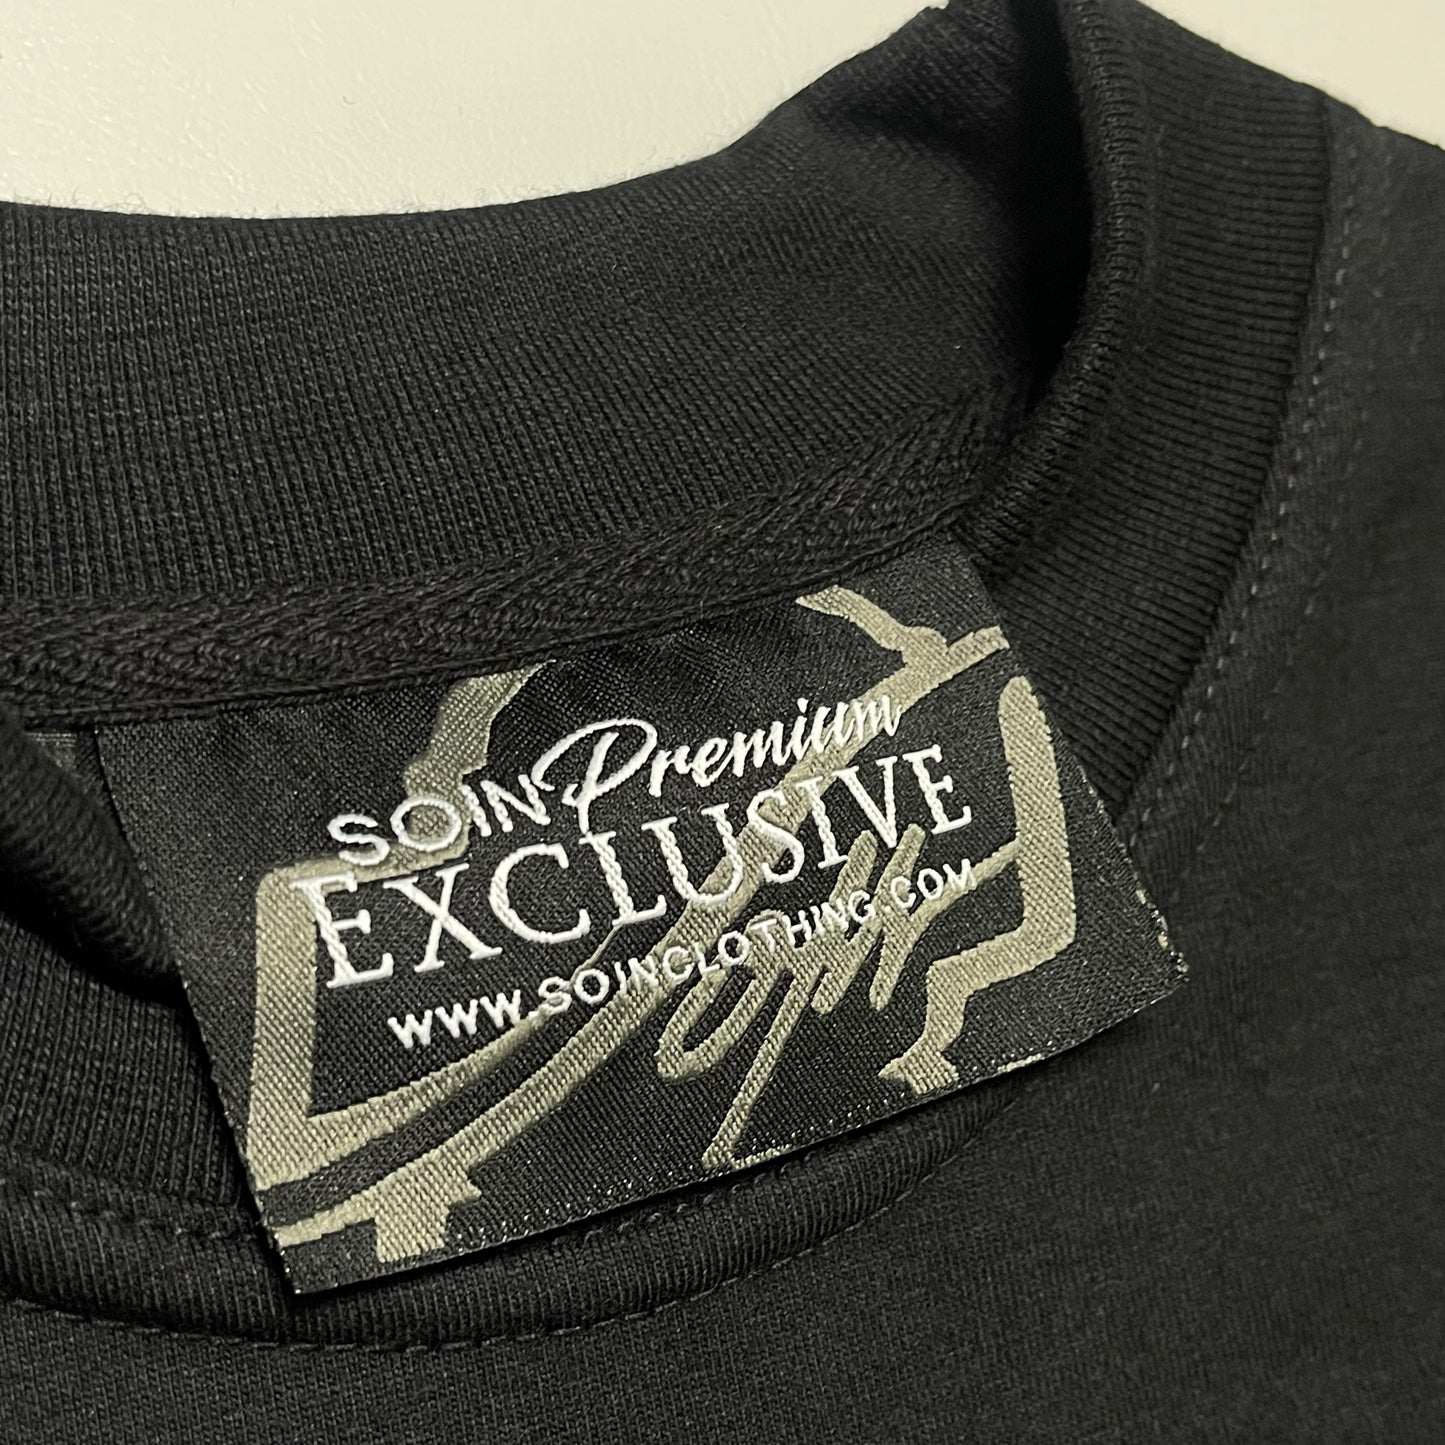 Electric Exclusive